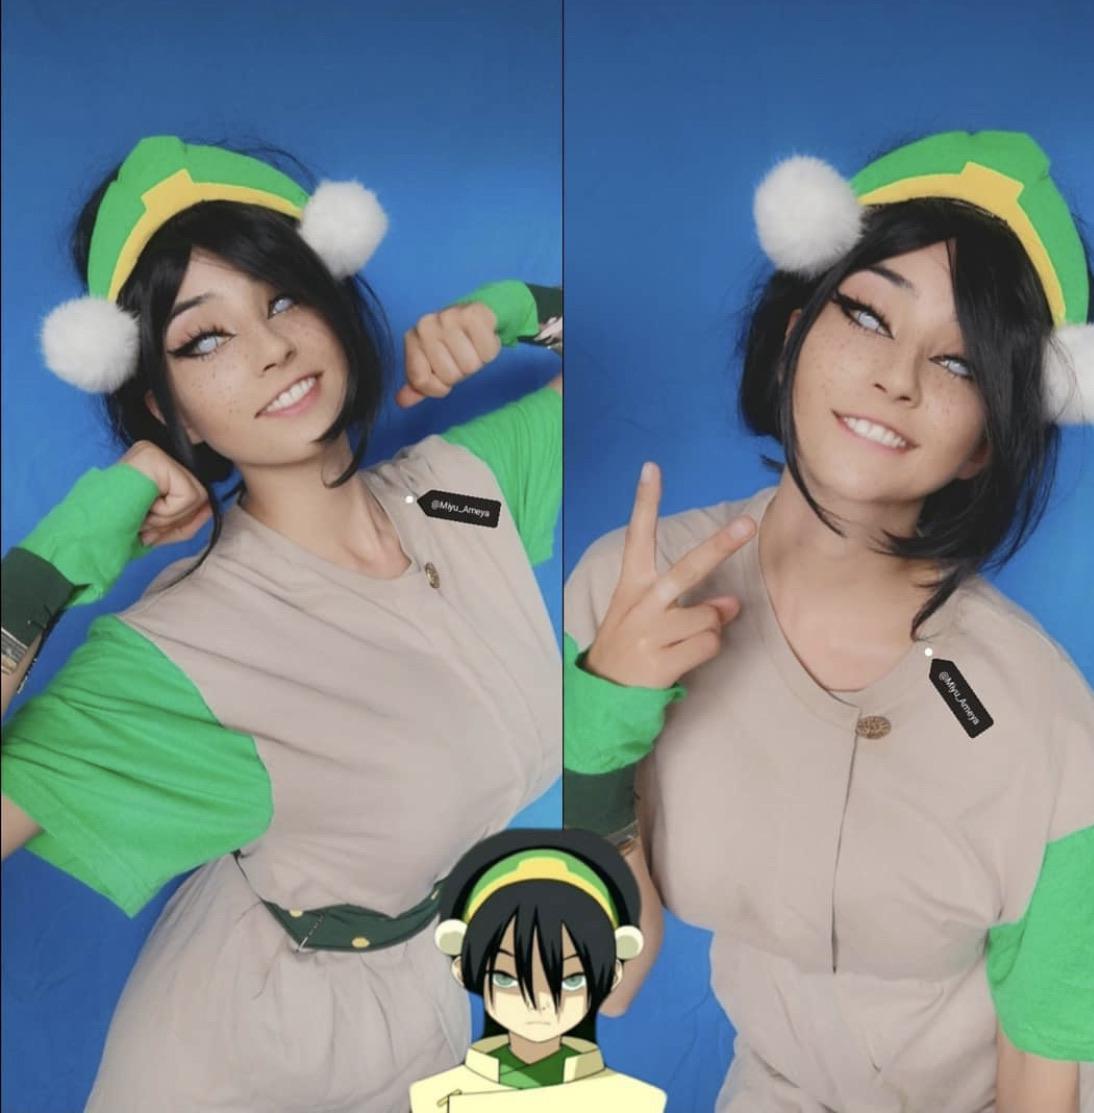 Toph Beifong From Avatar The Last Airbender By Miyu Amey